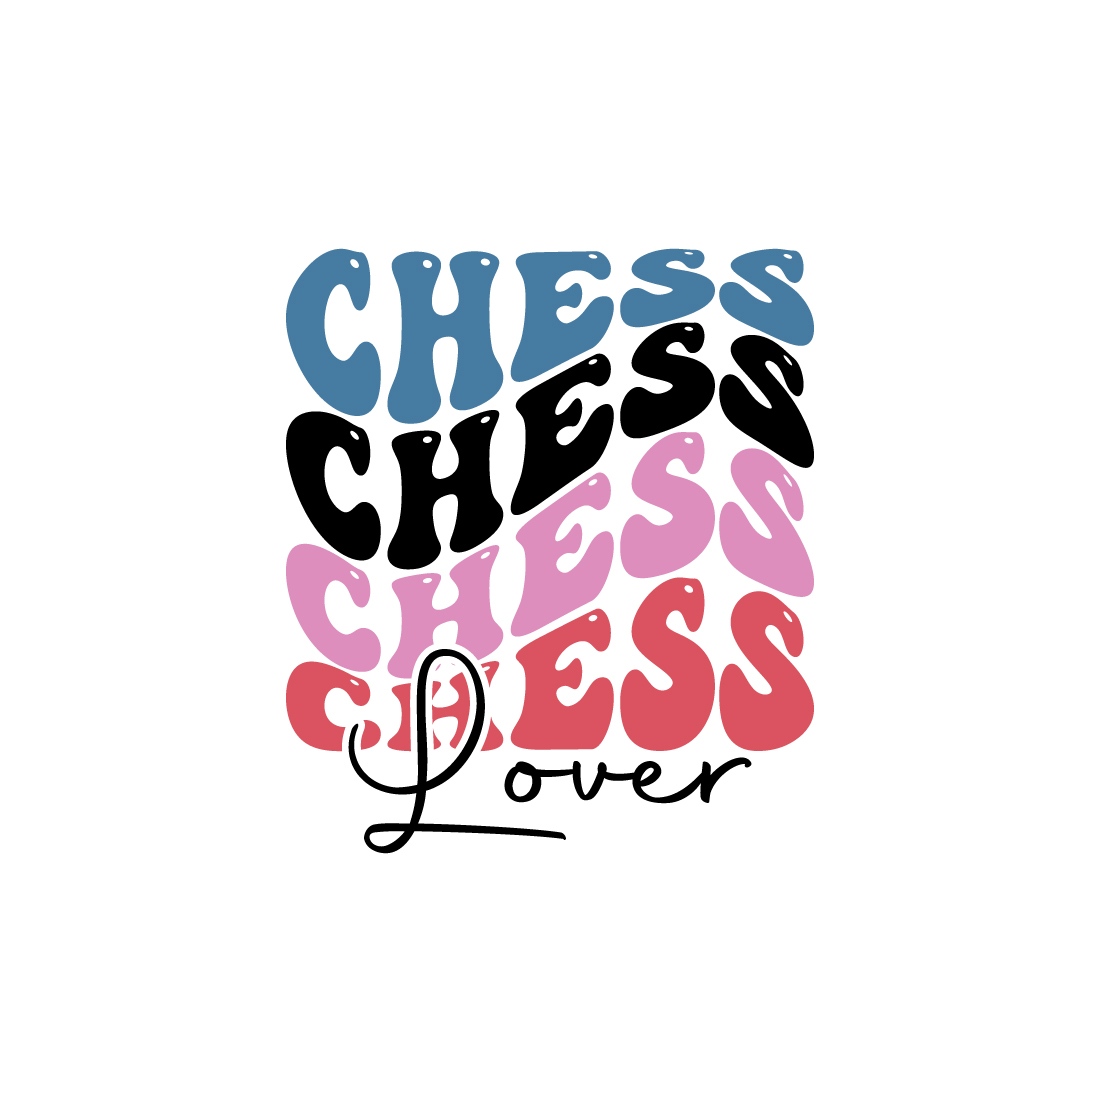 Chess lover indoor game retro typography design for t-shirts, cards, frame artwork, phone cases, bags, mugs, stickers, tumblers, print, etc preview image.